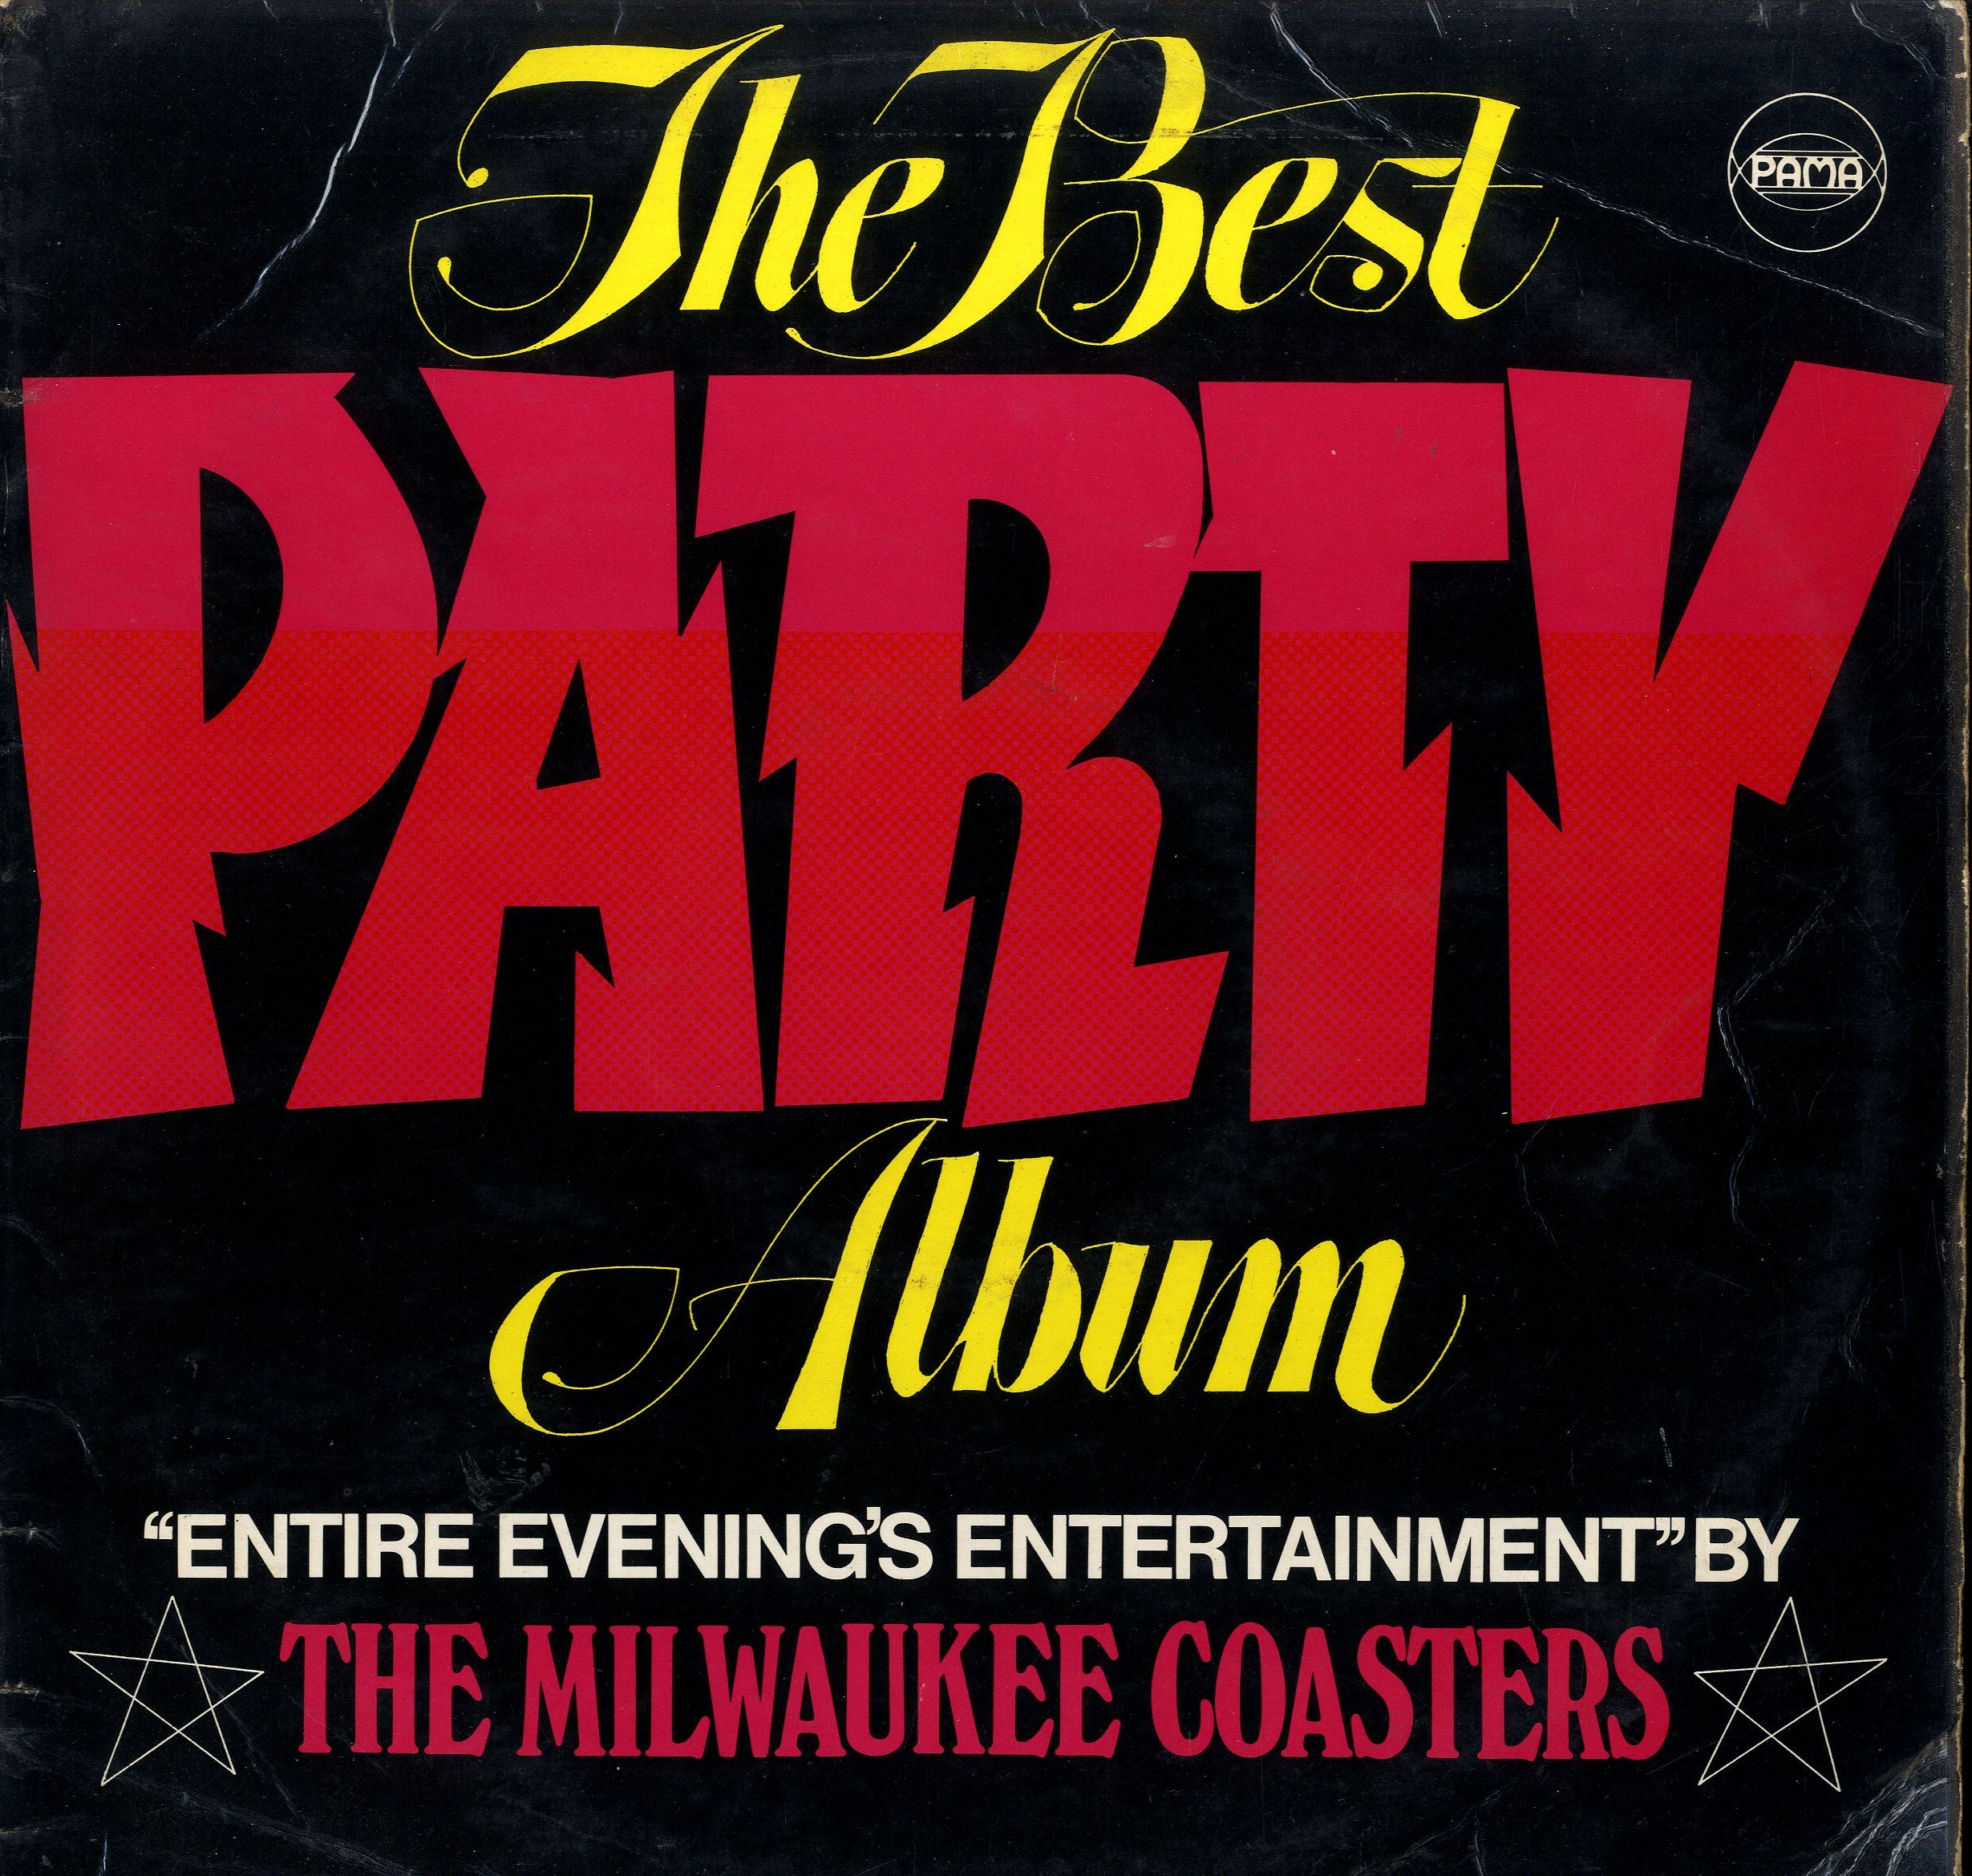 THE MILWAUKEE COASTERS [The Best Party Album]